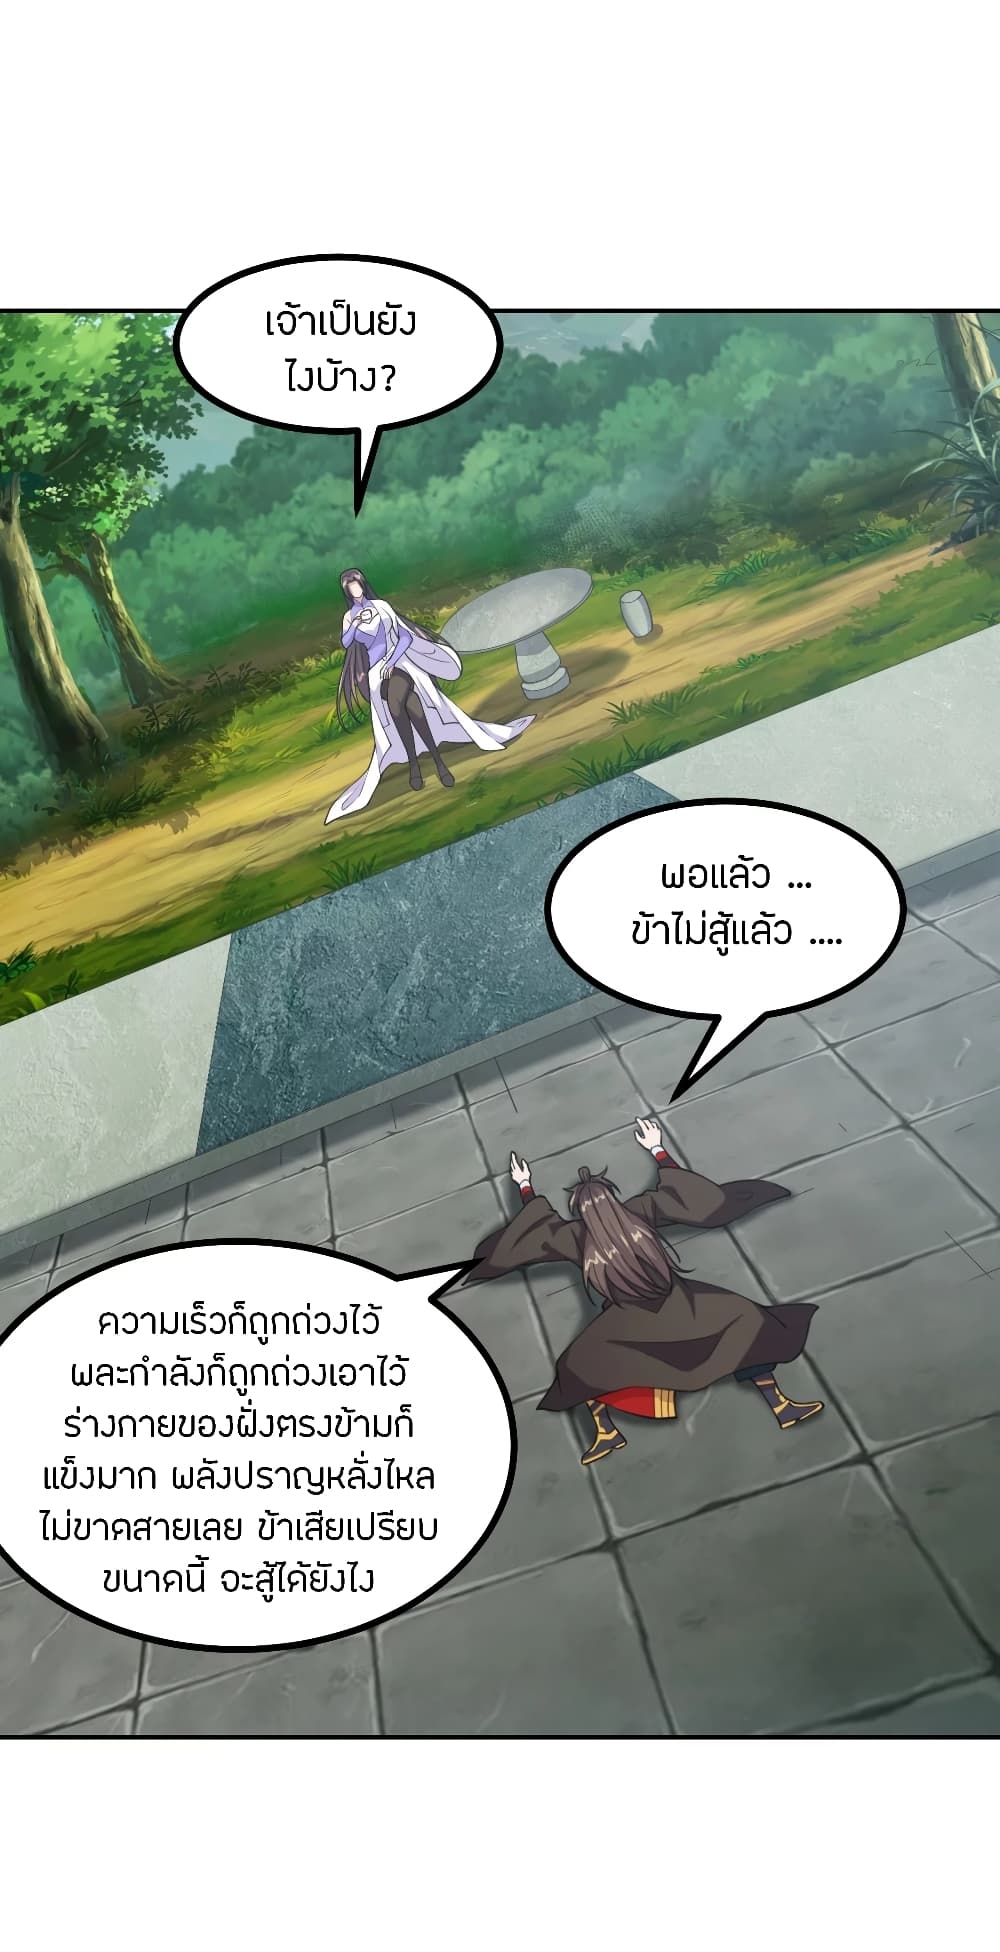 Banished Disciple’s Counterattack155 (2)